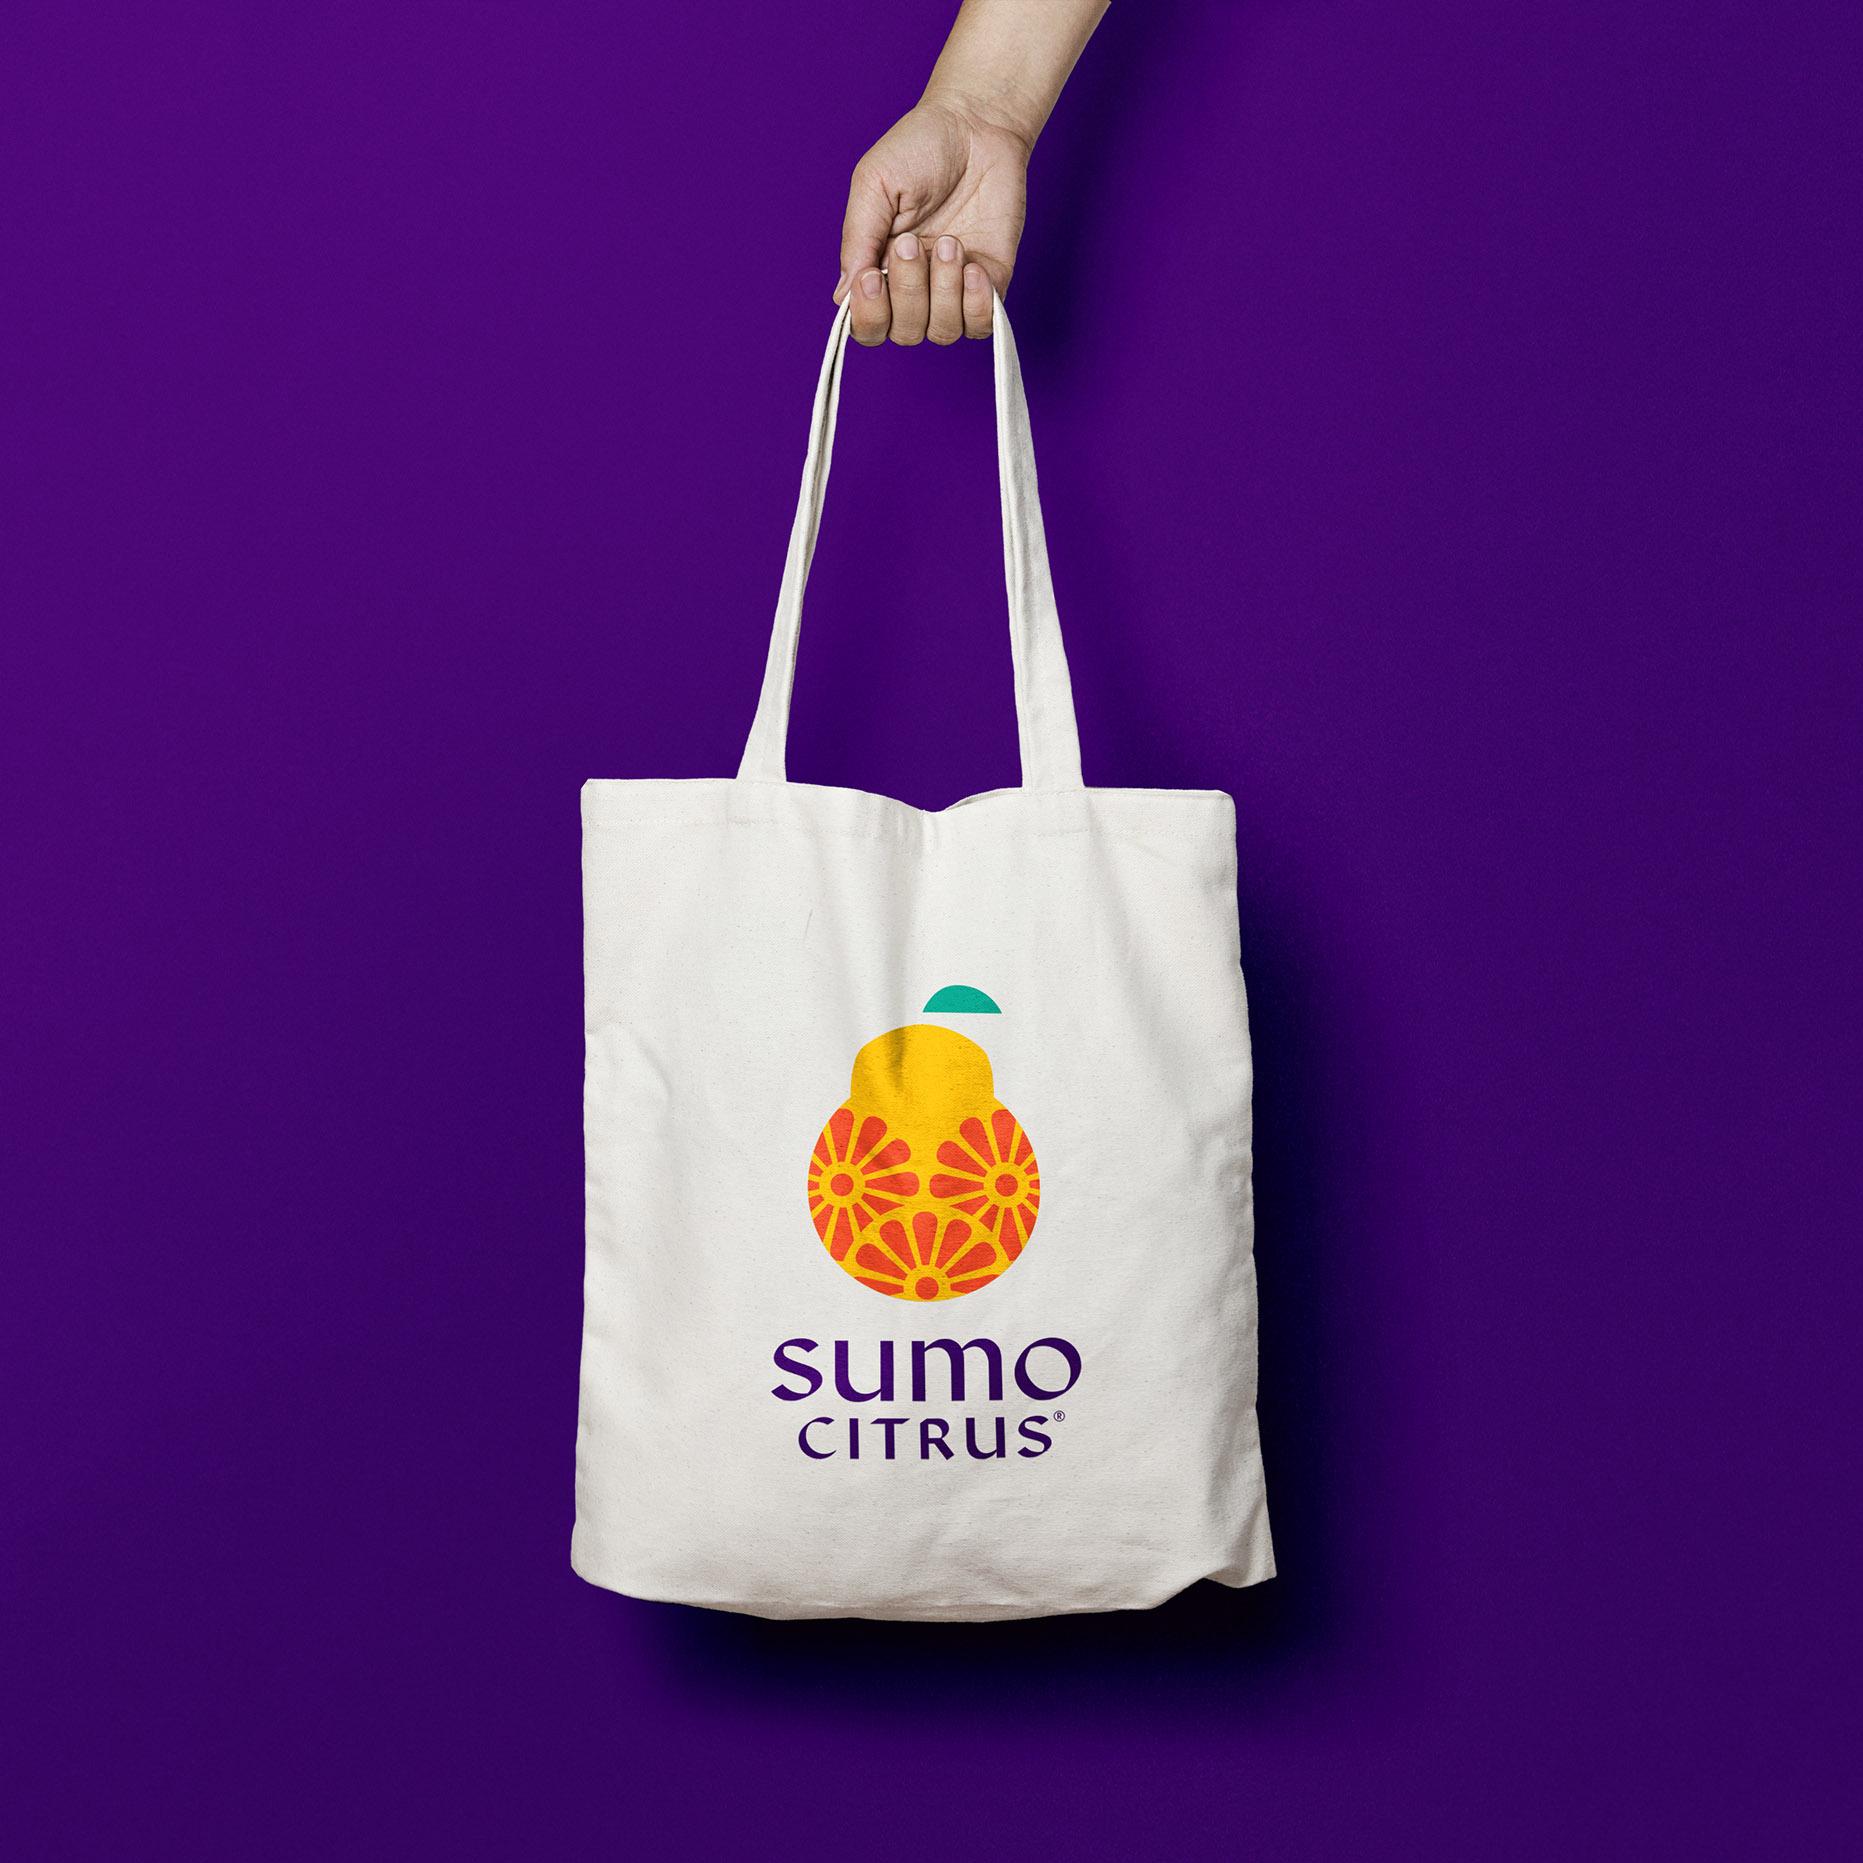 Free Sumo Citrus Swag Beanie and Tote Bag